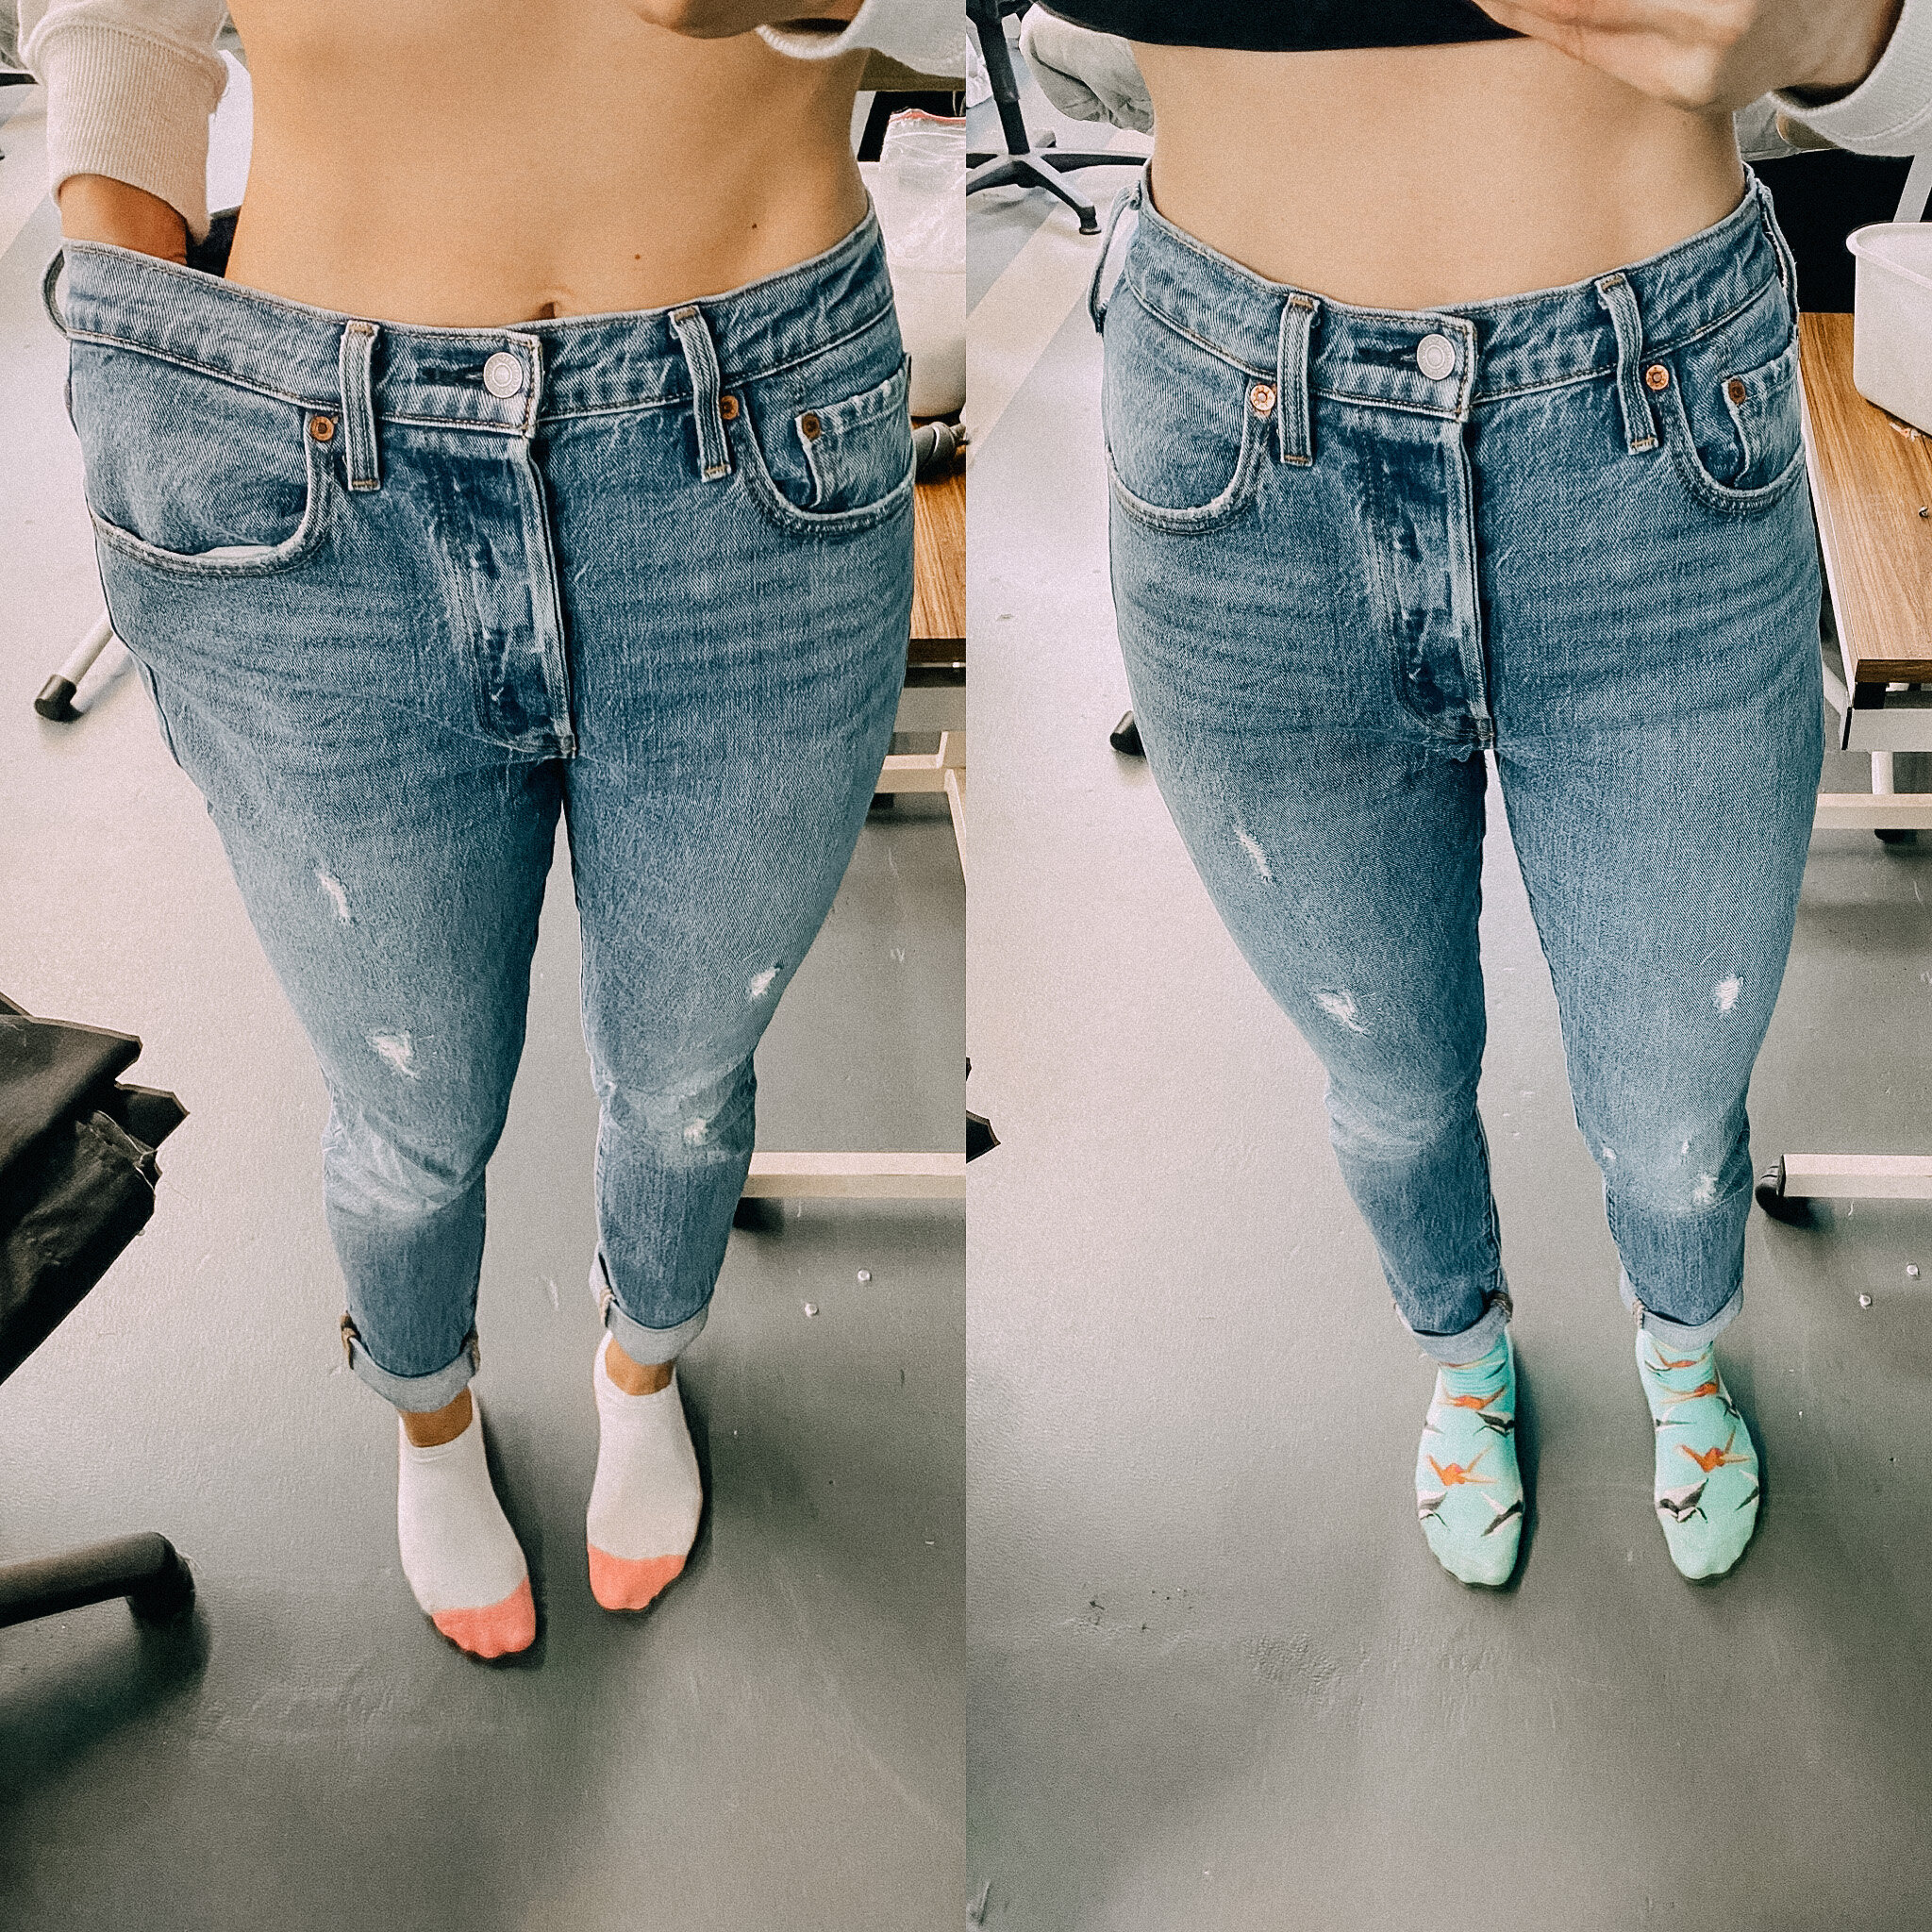 bagagerum Supermarked hud Jeans Alteration: How to size down Denim Jeans at the waist — Sewing  Patterns by Masin